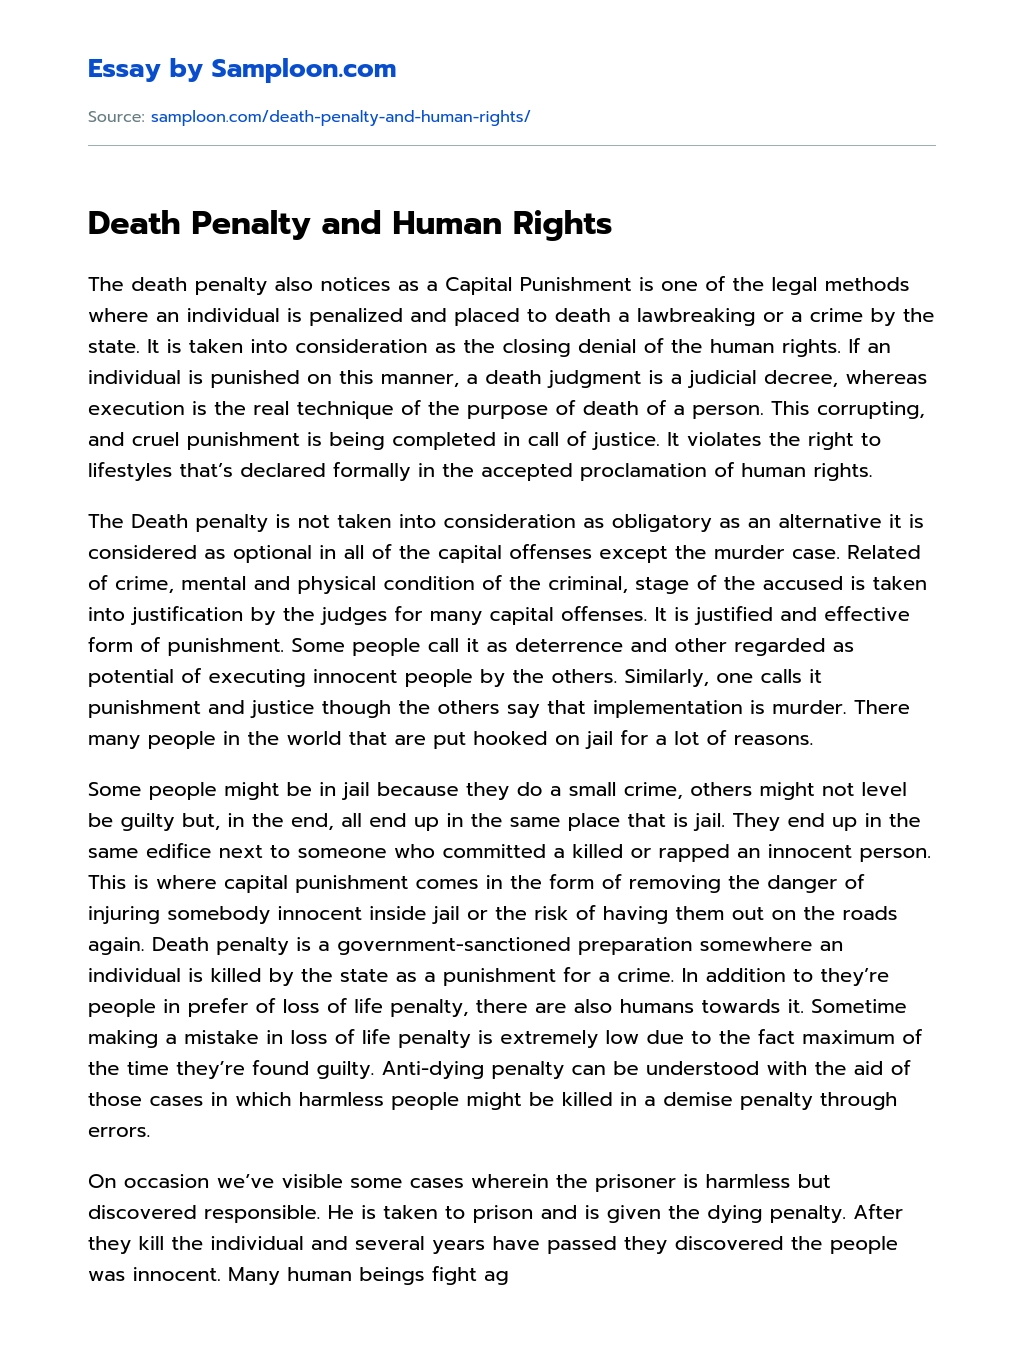 Death Penalty and Human Rights essay